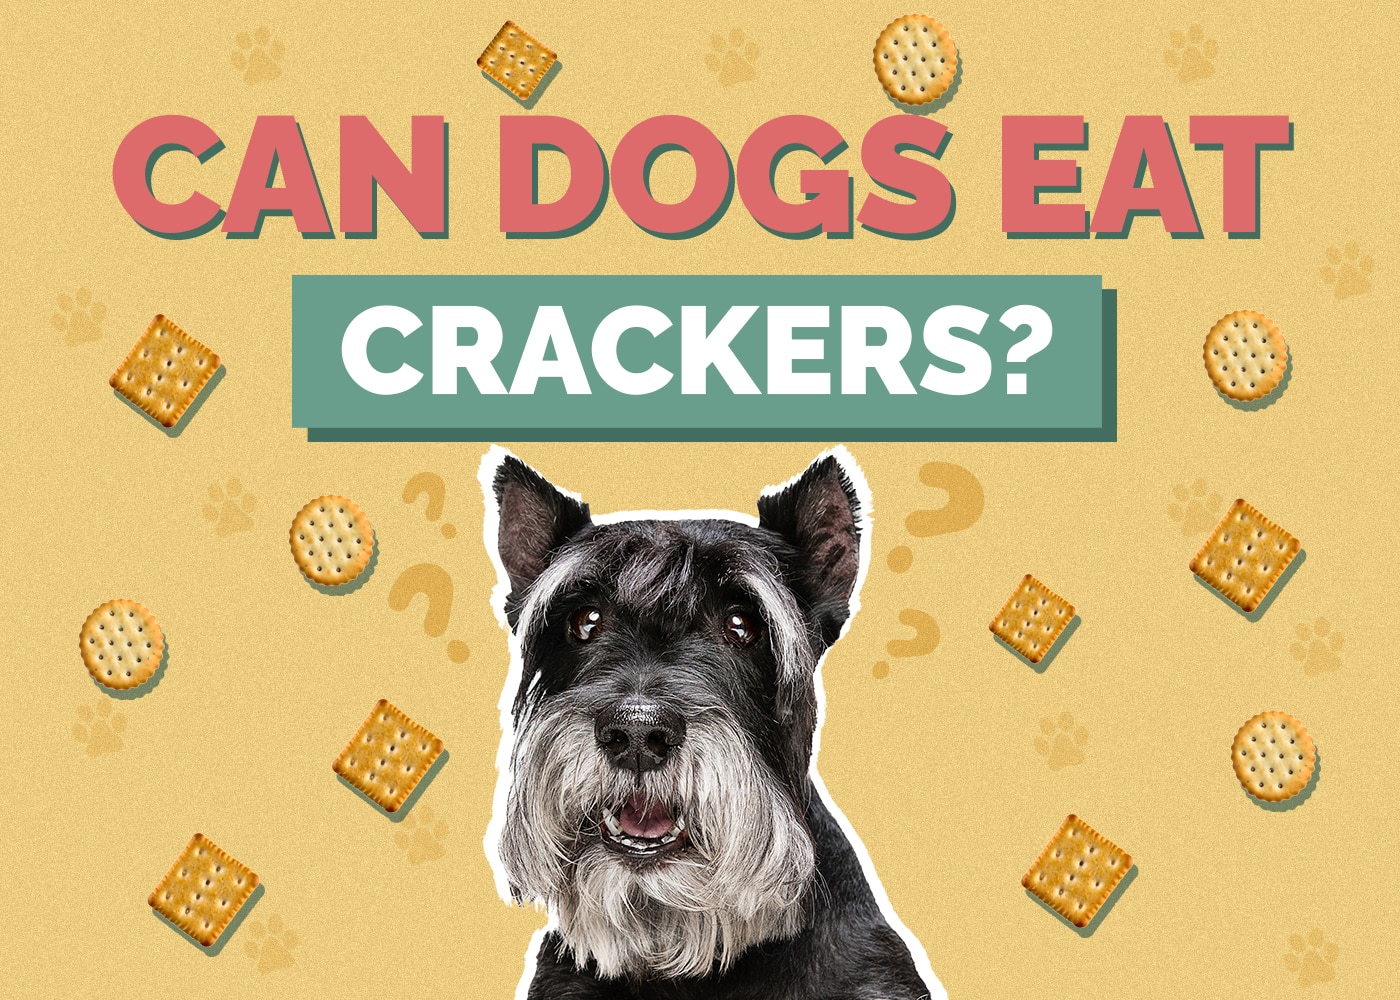 Can Dog Eat crackers